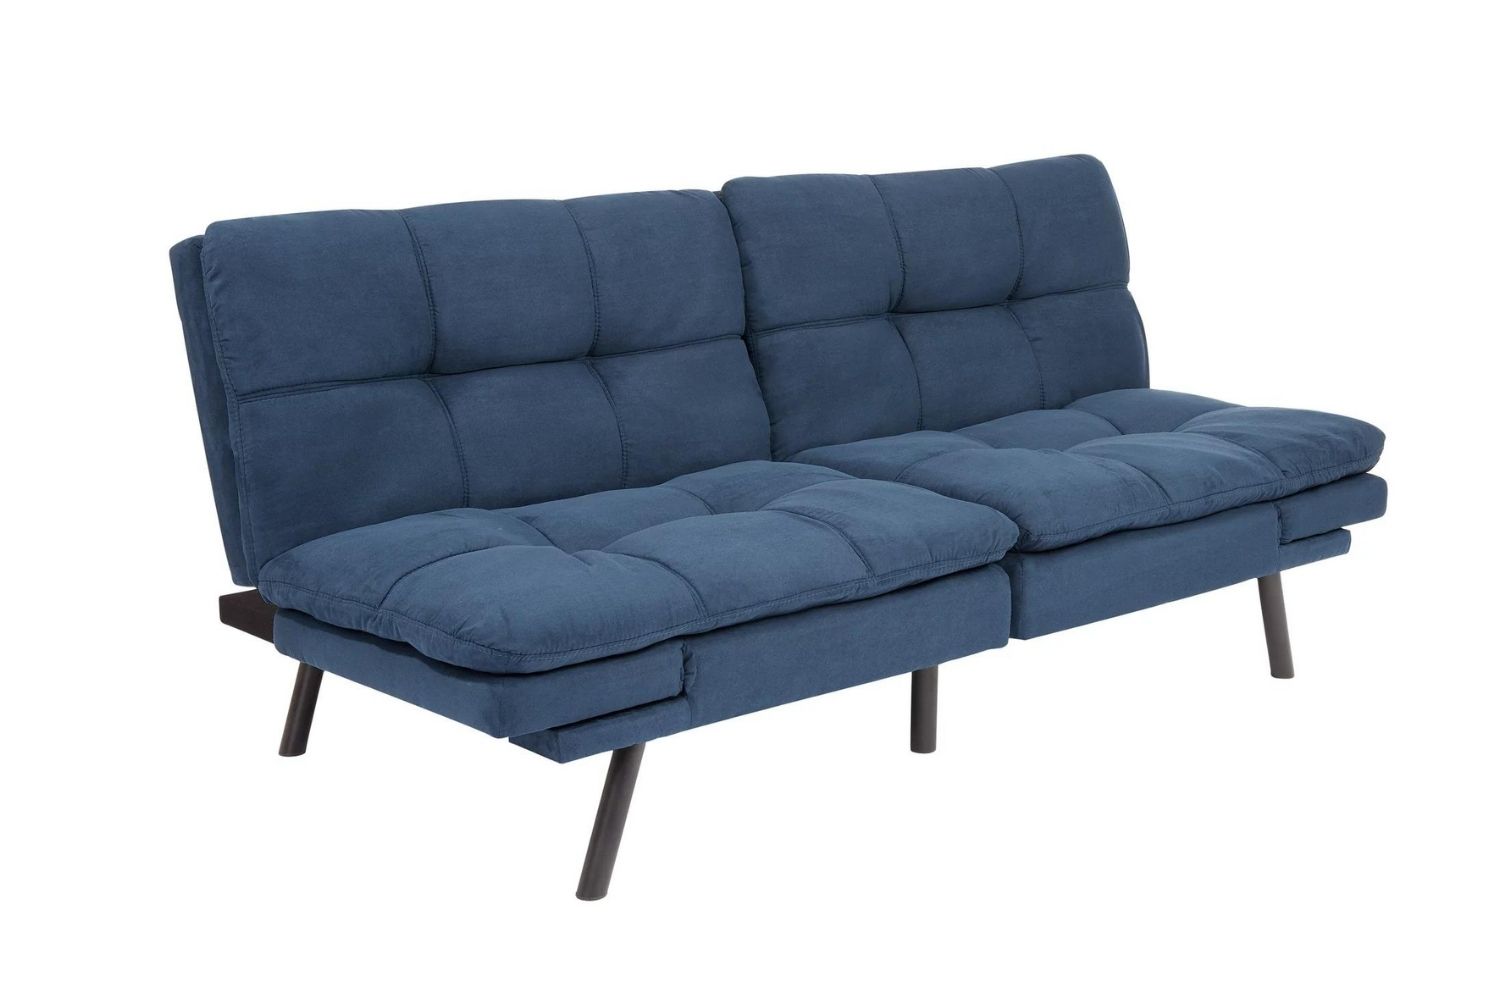 10-intriguing-facts-about-futon-walmart